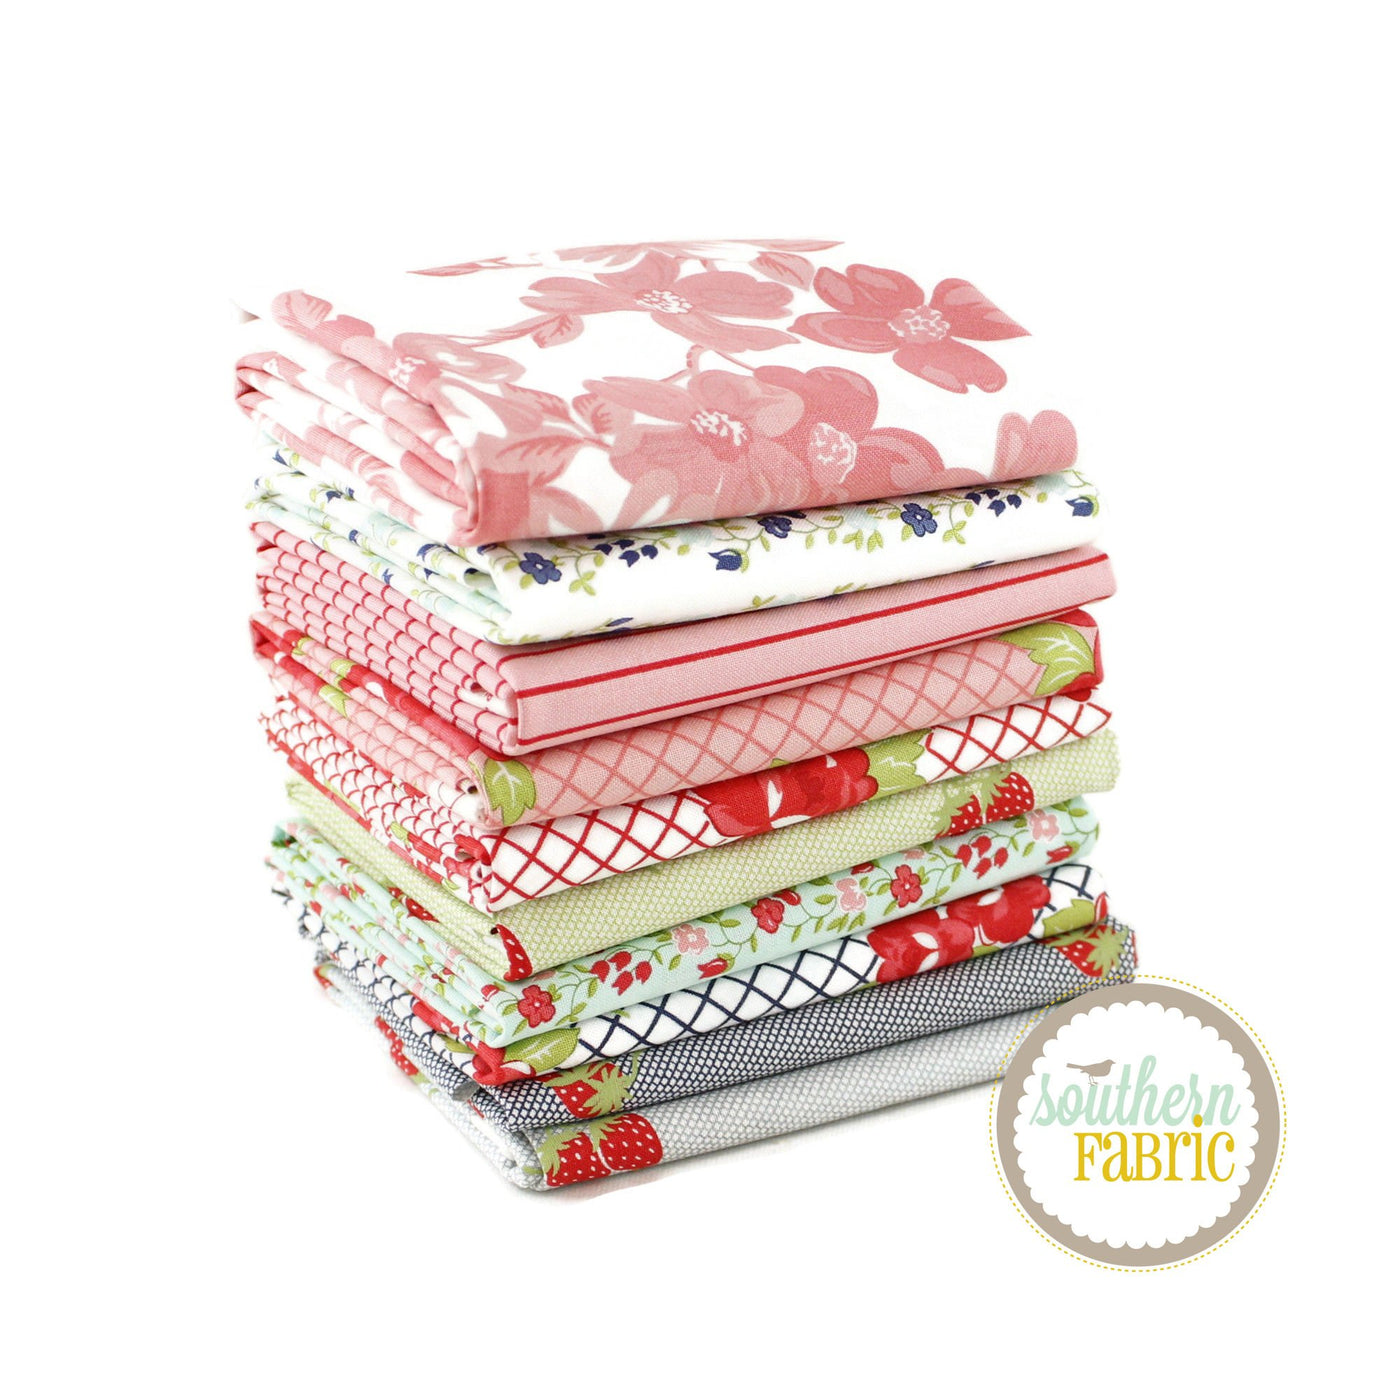 Sunday Stroll Fat Quarter Bundle (10 pcs) by Bonnie and Camille for Moda